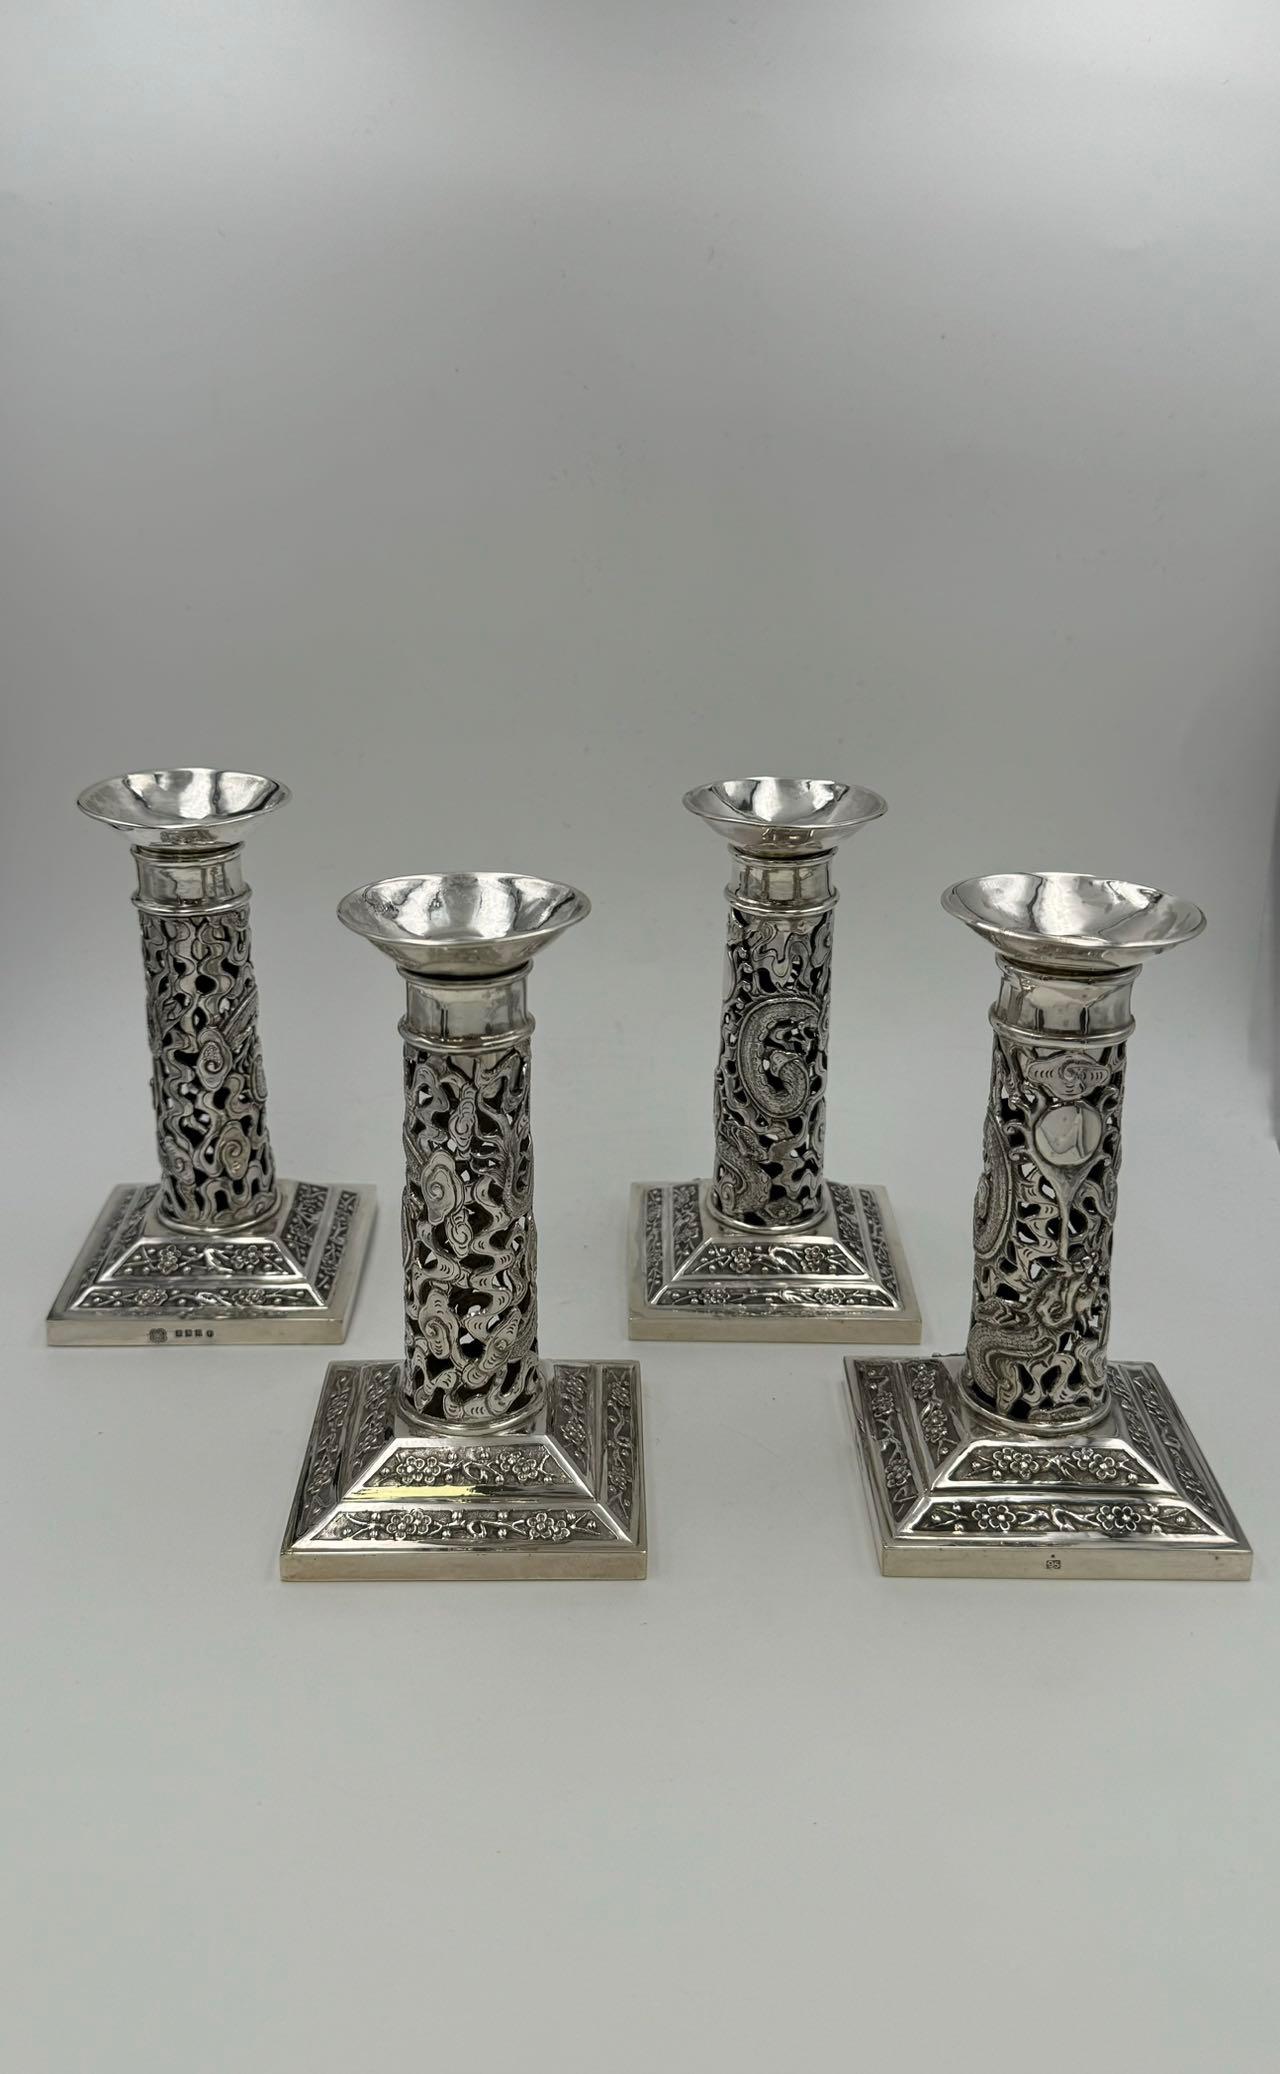 A Set of 4 Chinese Export Silver Candlesticks with Glasgow import marks for the firm of George Edward & Sons, 1899. The Scottish firm was one of the few UK companies that stocked Chinese and Japanese silver, and pieces with their import mark are